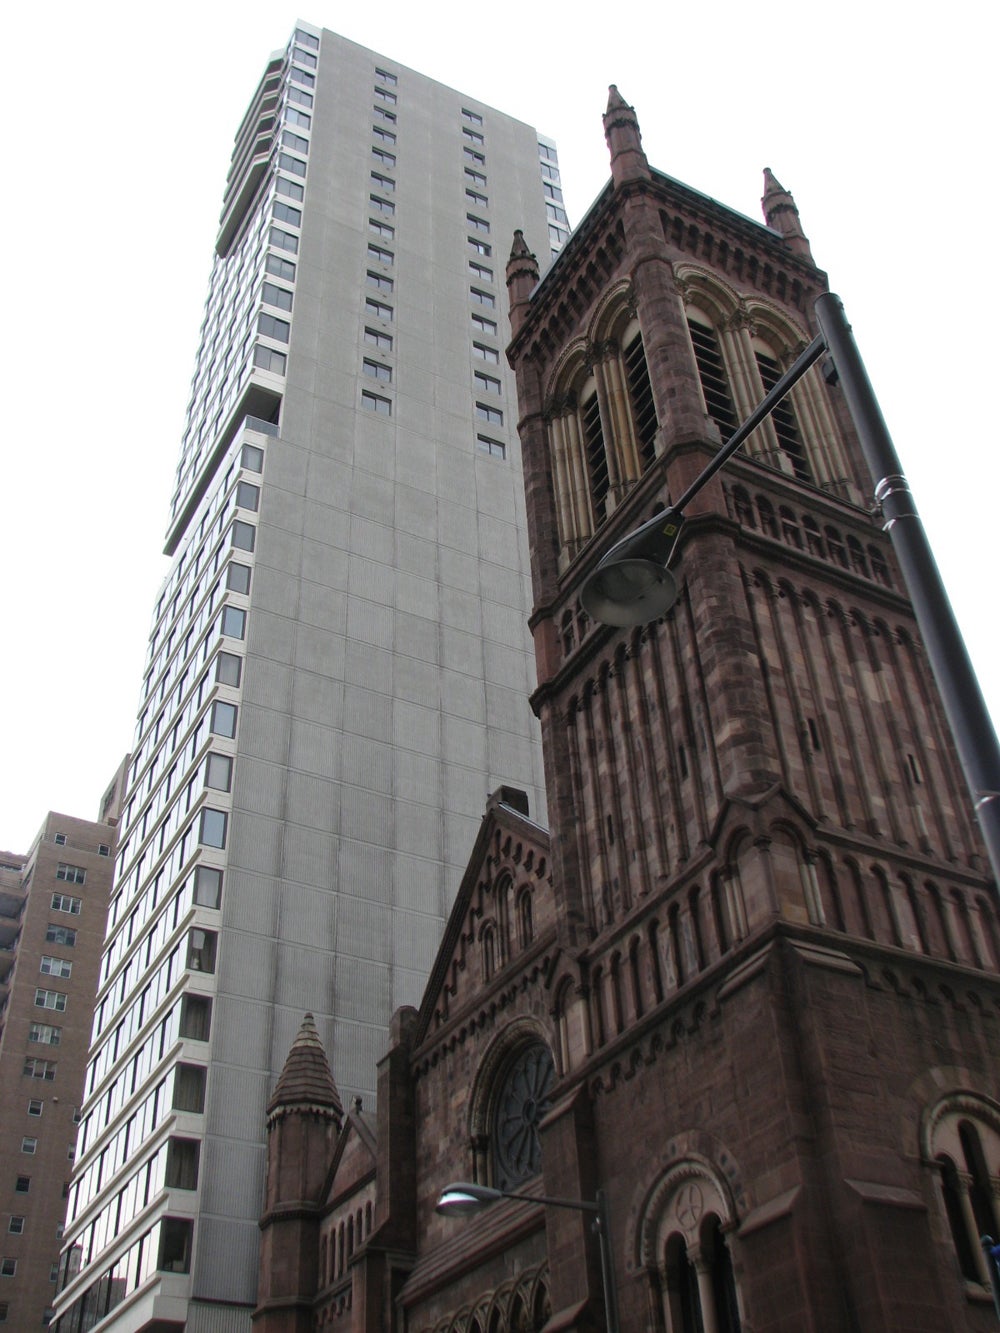 The Holy Trinity tower hold its own against the neighboring condo tower.